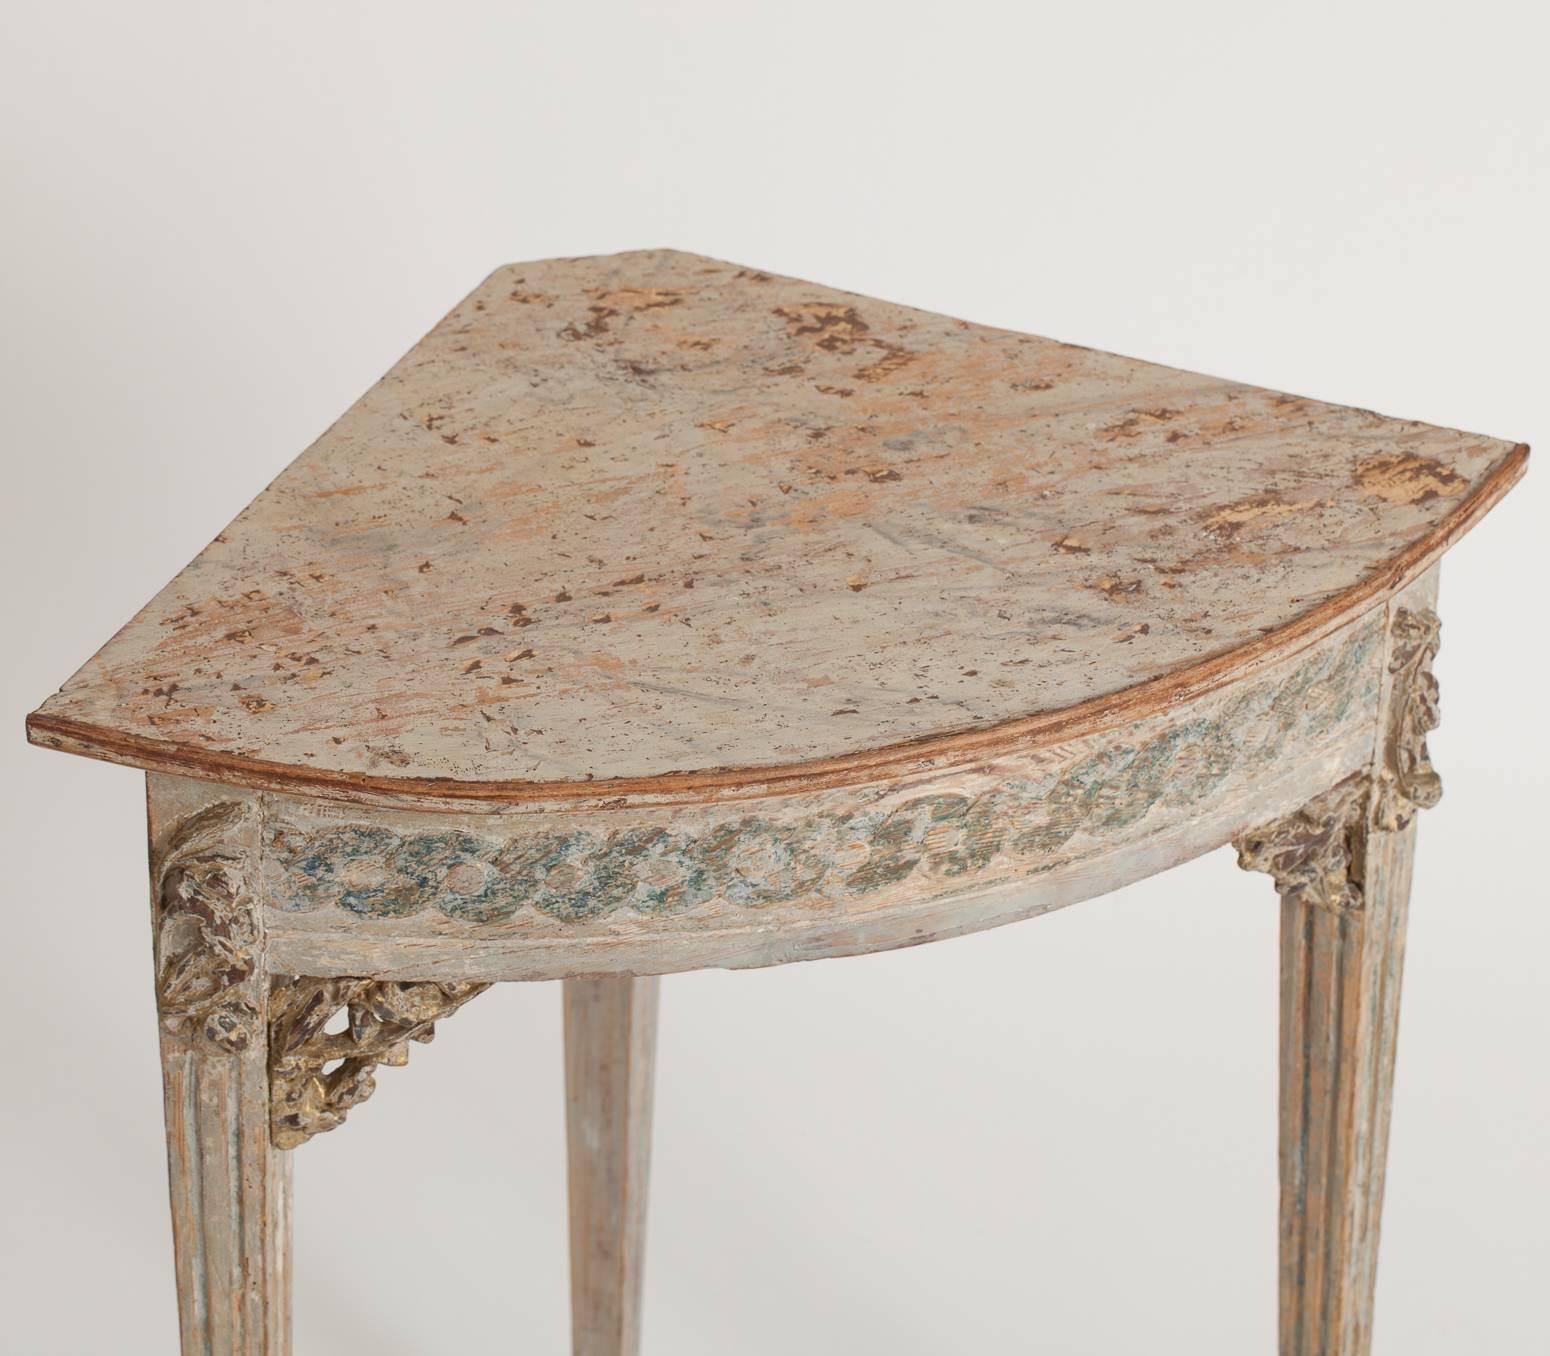 This charming table from the late 18th century retains traces of the original paint and faux marble painted top. The elegant apron has scroll details and applied ornamental carvings at each corner with traces of gilt, ending in reeded legs.